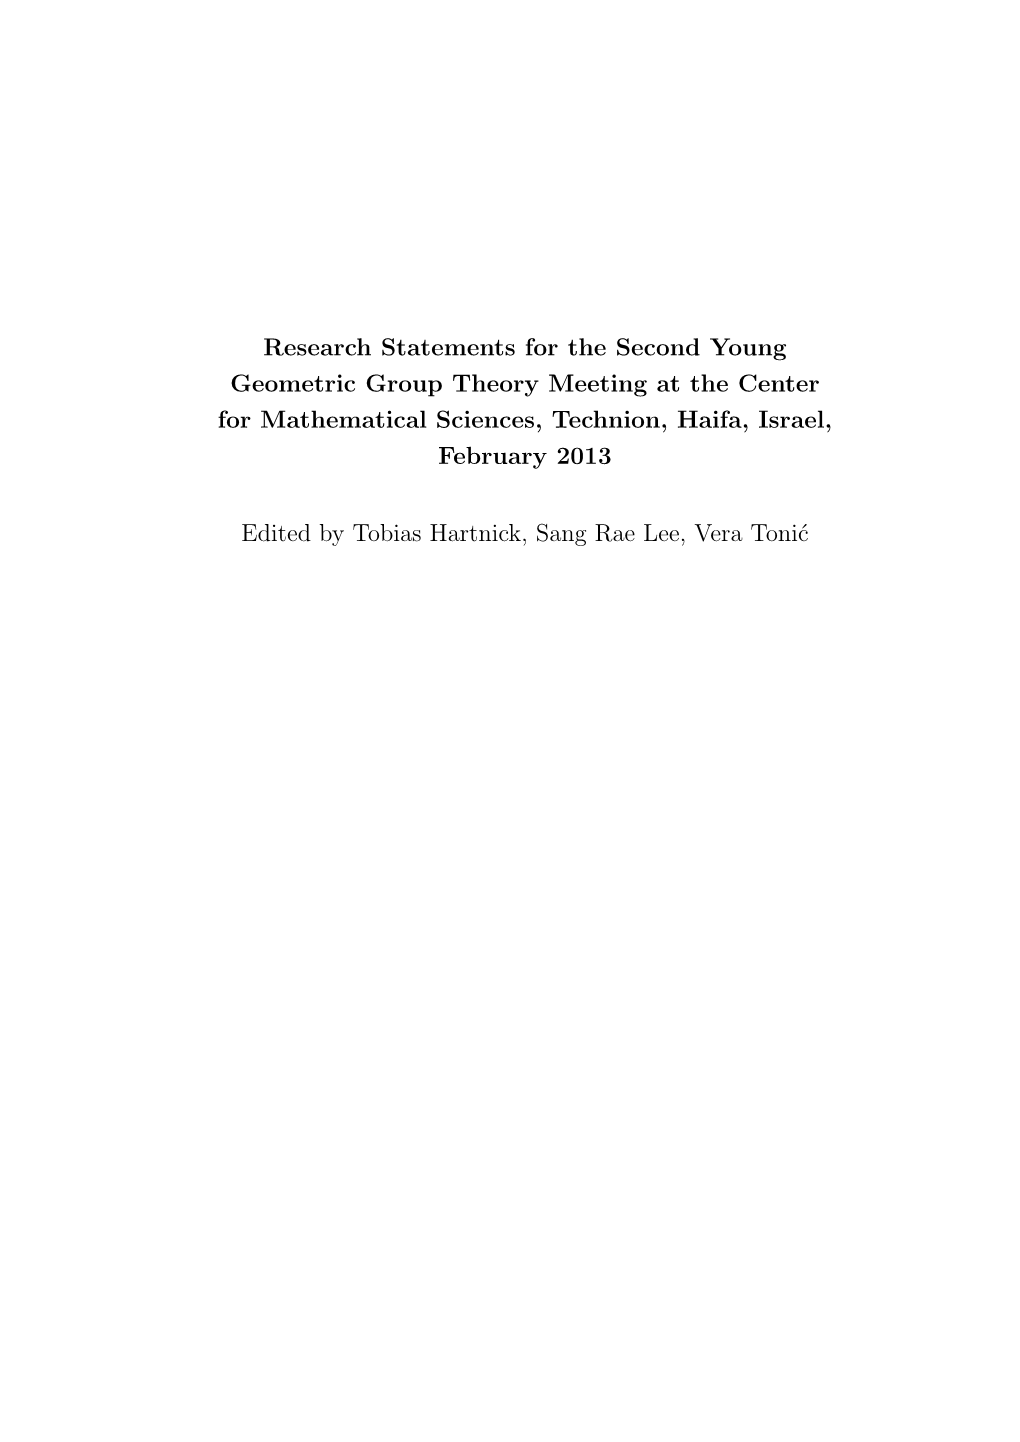 Research Statements for the Second Young Geometric Group Theory Meeting at the Center for Mathematical Sciences, Technion, Haifa, Israel, February 2013